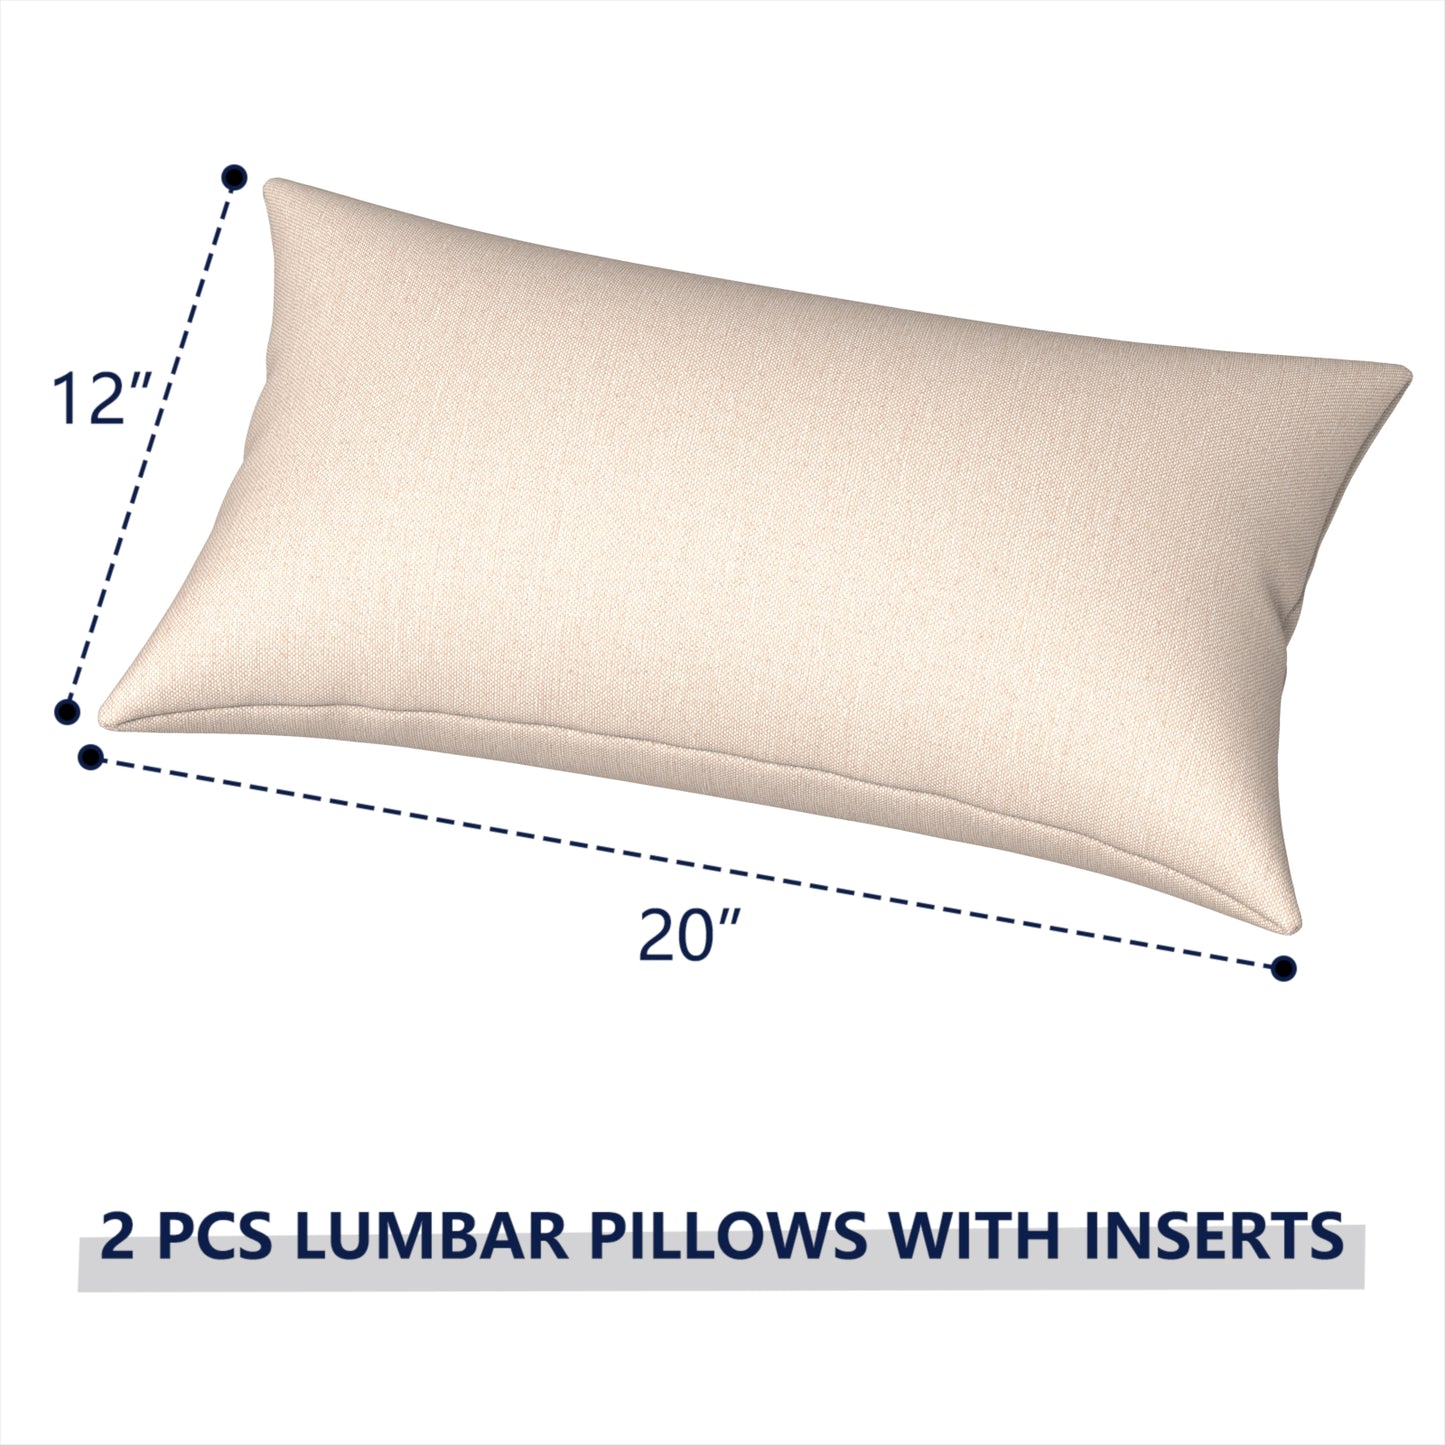 Melody Elephant Outdoor/Indoor Lumbar Pillows, Water Repellent Cushion Pillows, 12x20 Inch, Outdoor Pillows with Inserts for Home Garden, Pack of 2, Beige